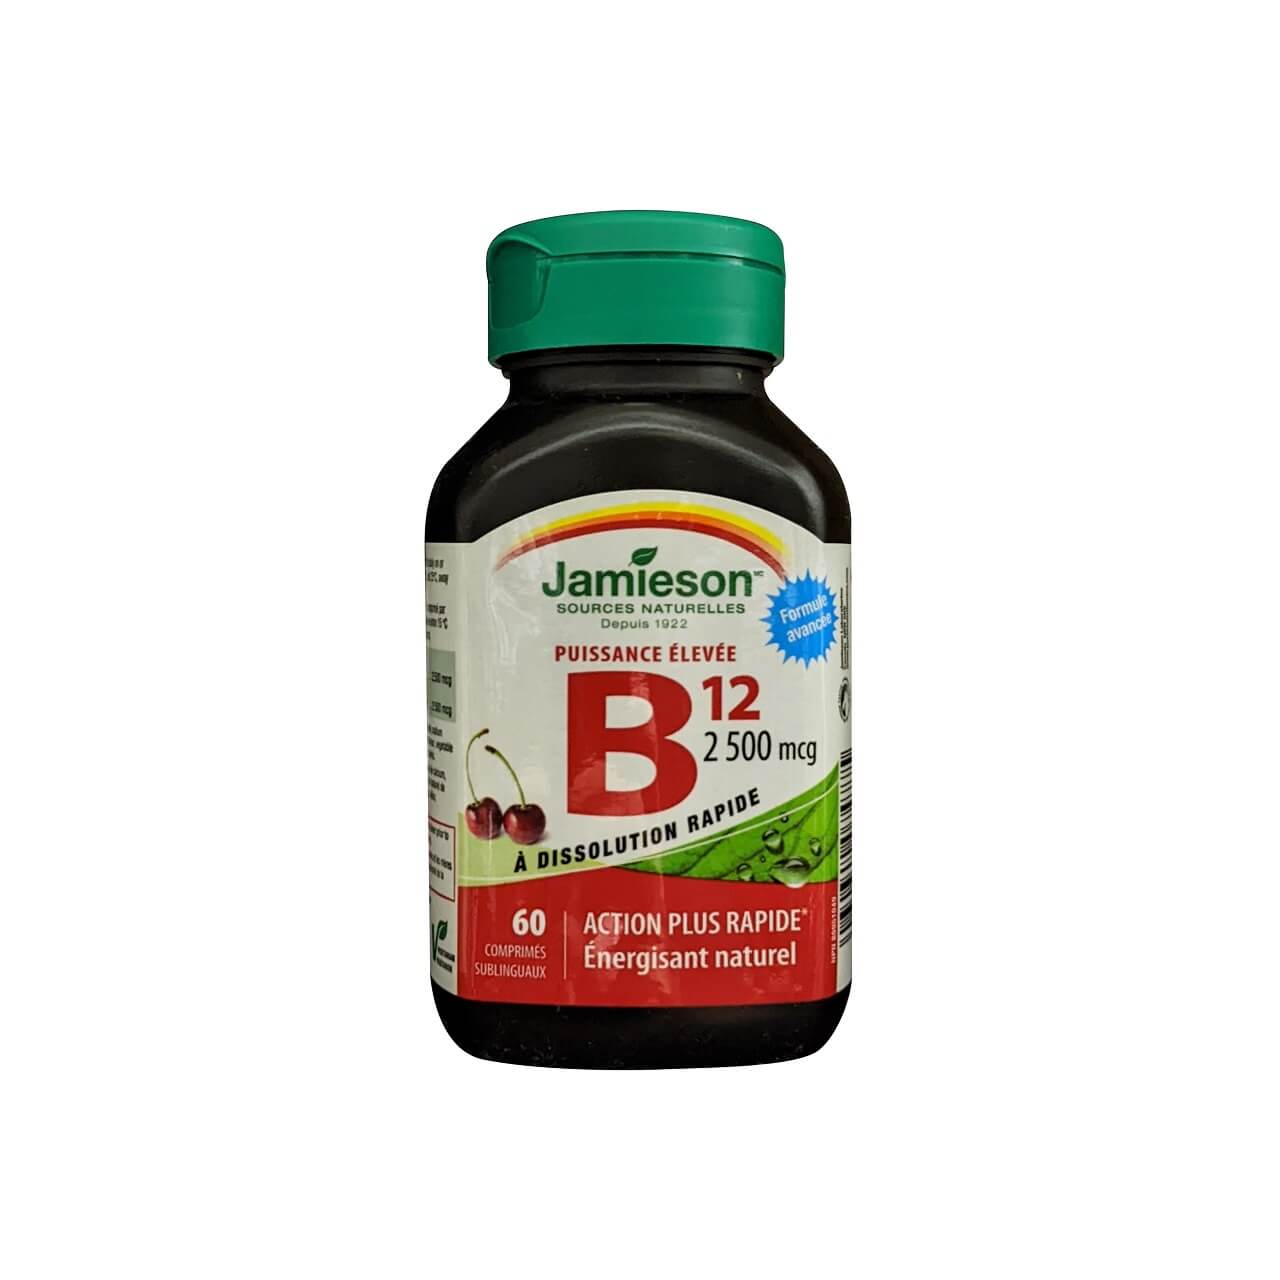 Product label for Jamieson B12 2500 mcg High Potency Fast Dissolving (60 tablets) in French